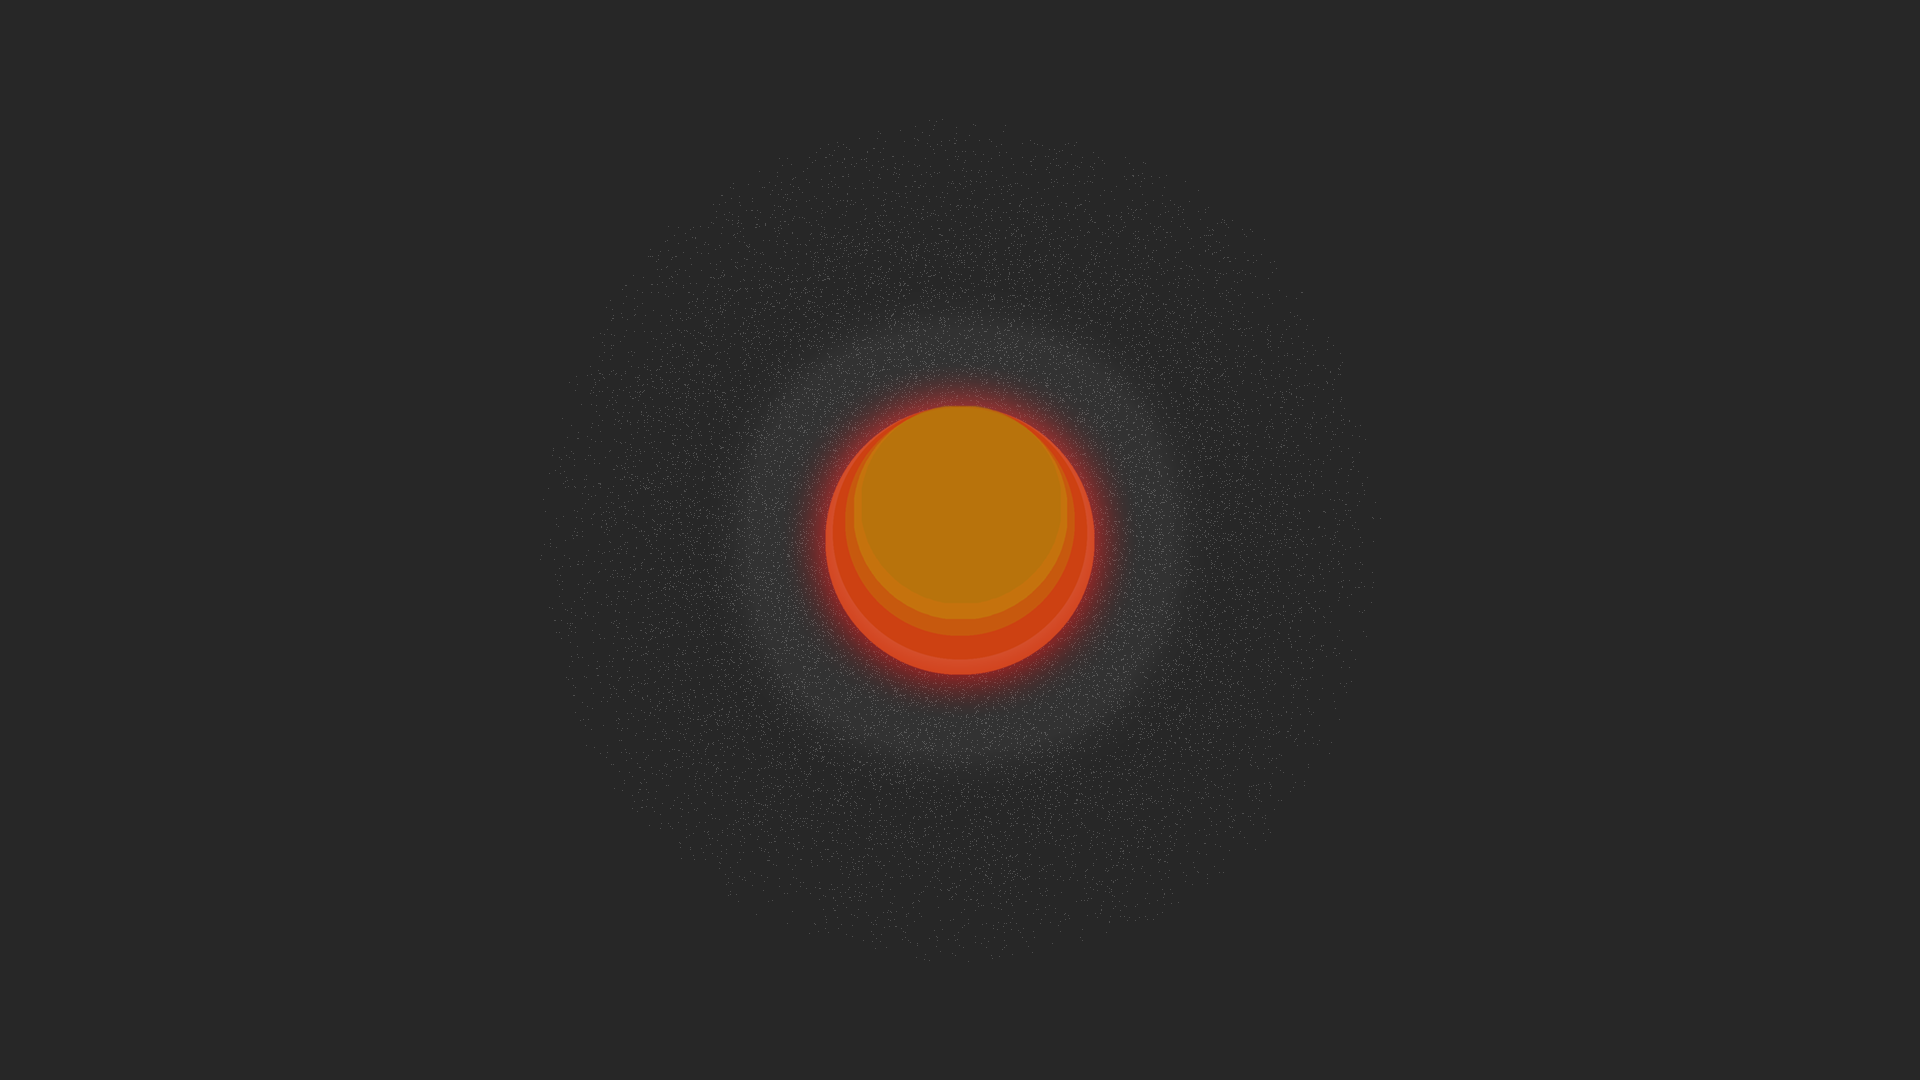 General 1920x1080 Sun minimalism simple background space art space